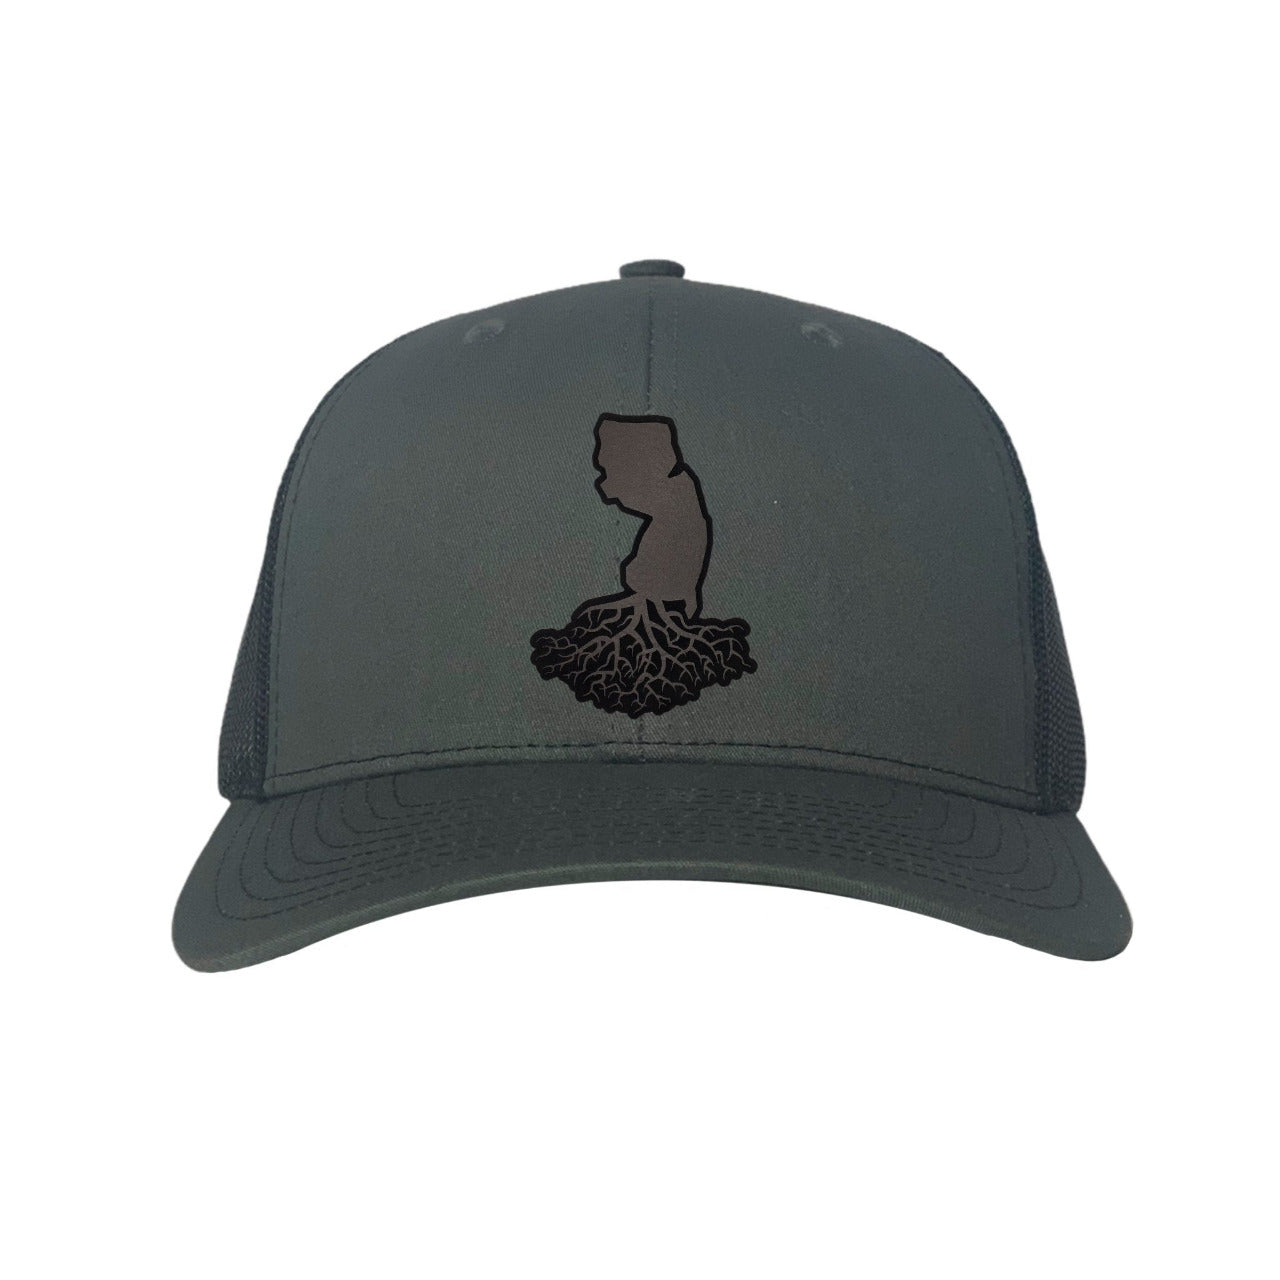 New Jersey Roots Patch Trucker Hat - Hats